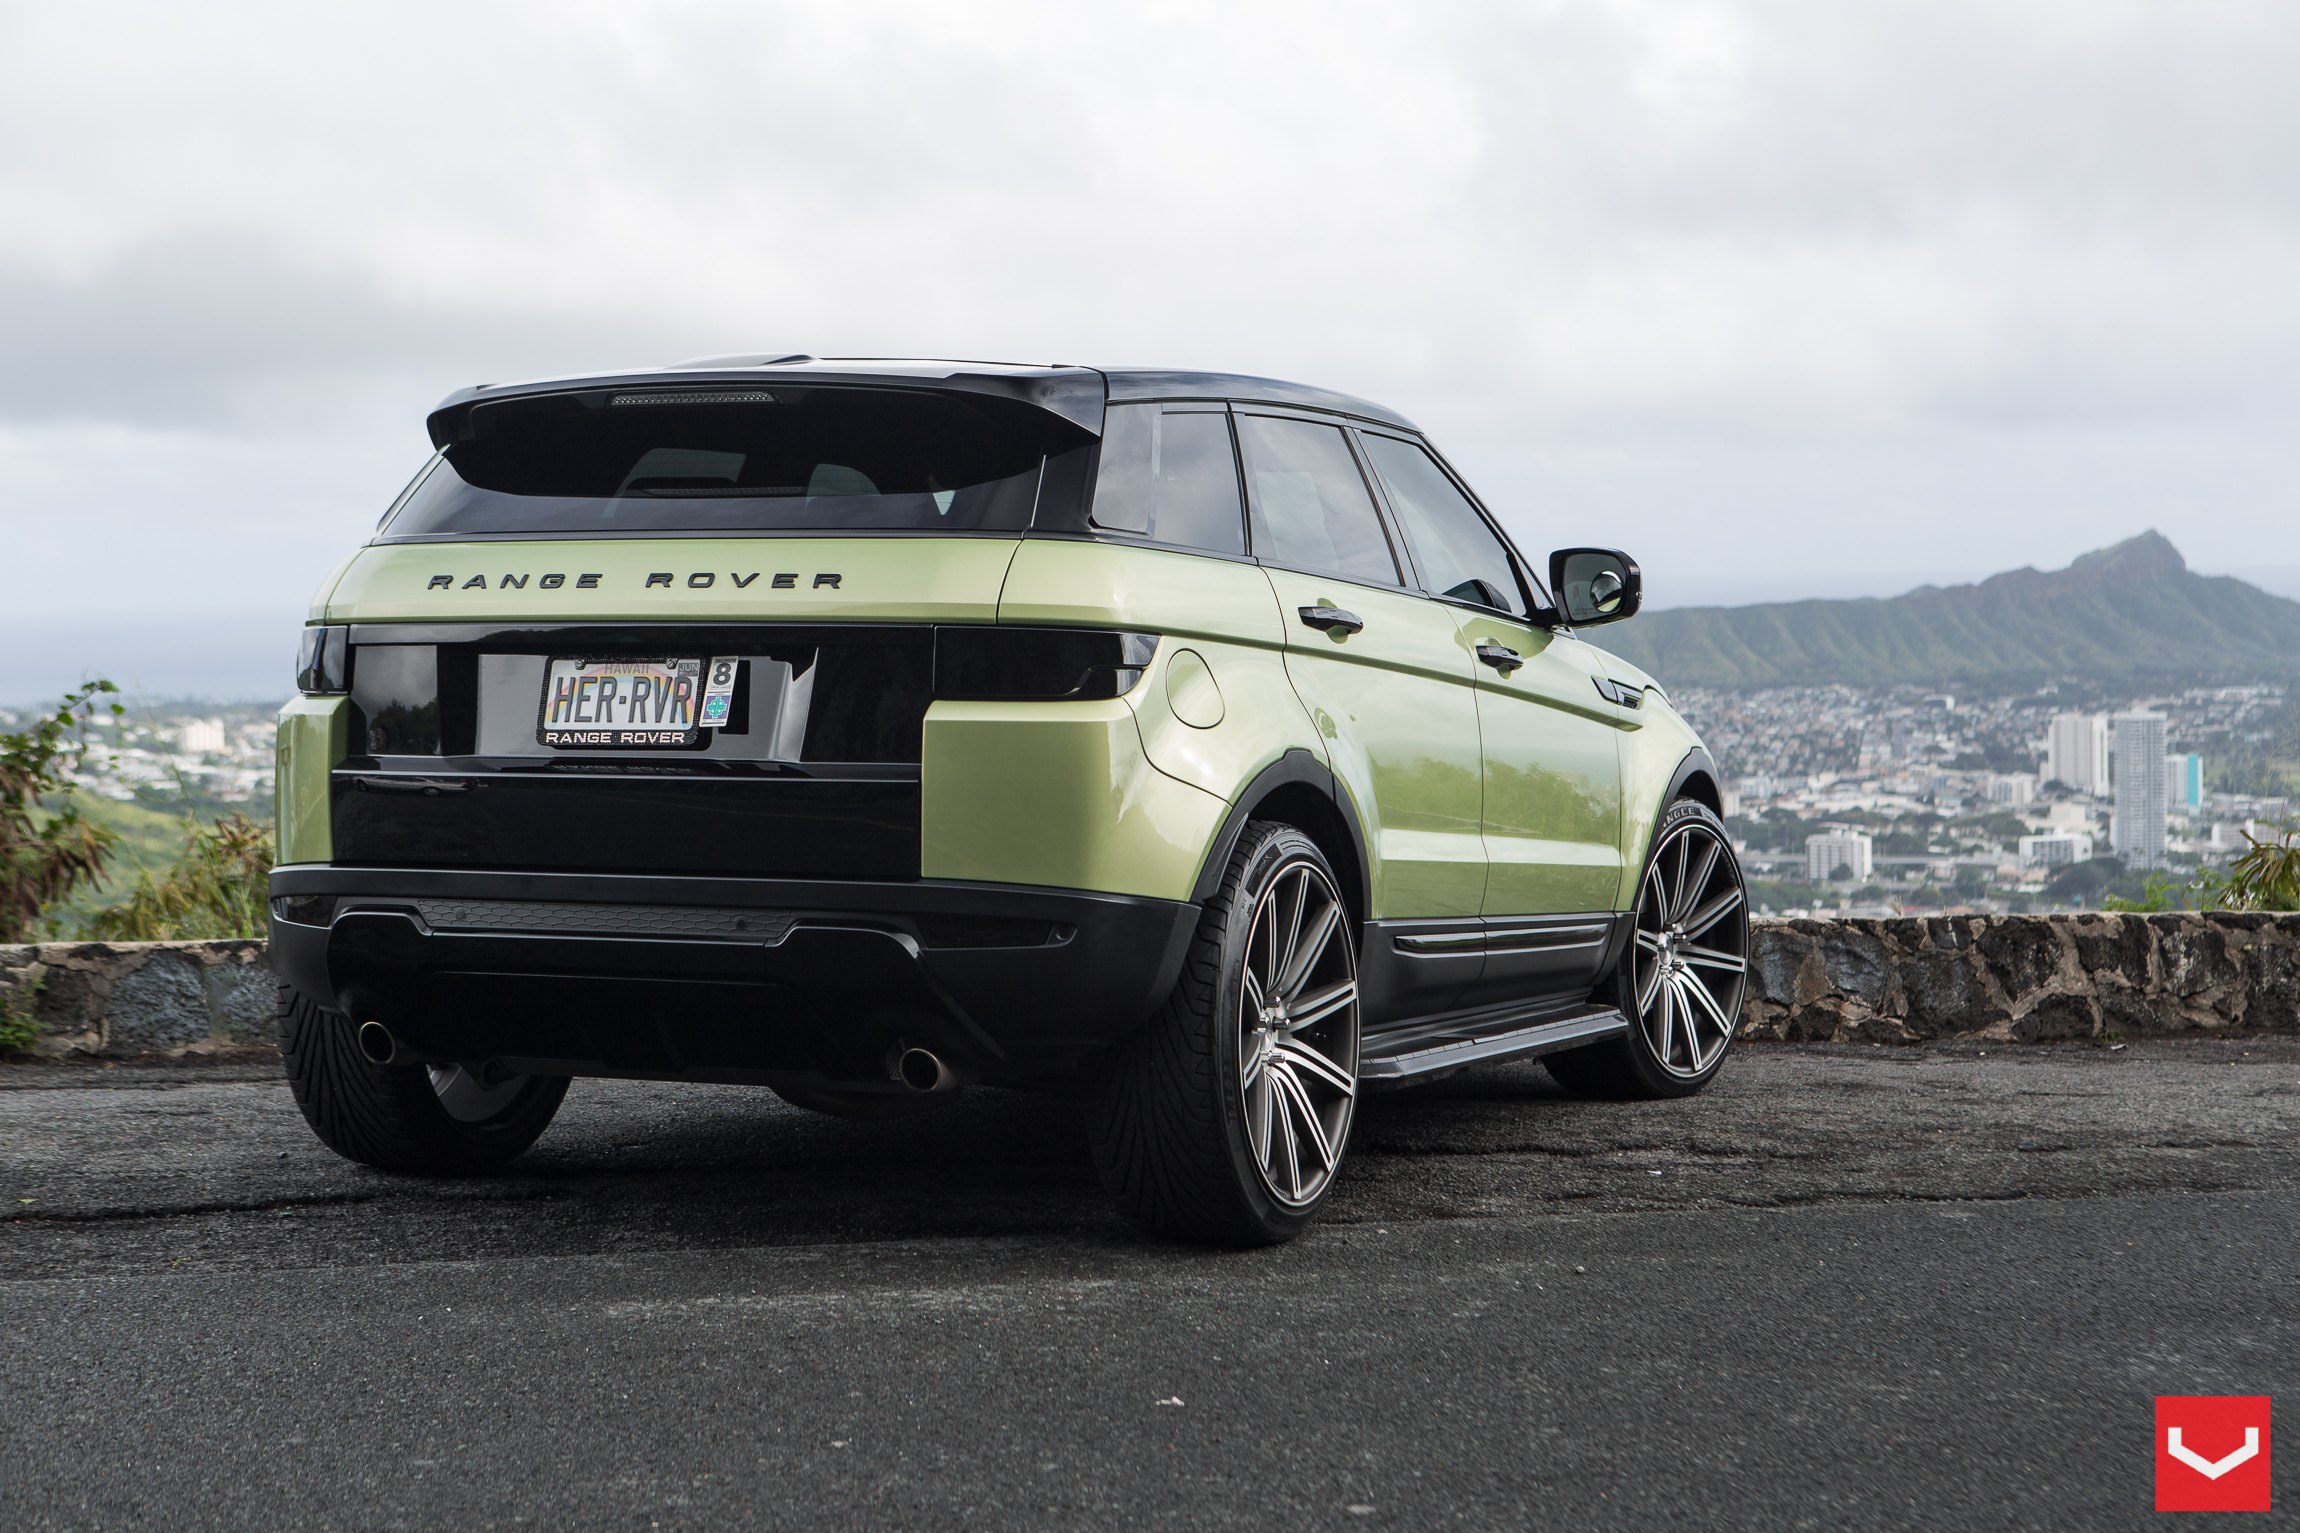 Built to Impress Range Rover Evoque With Custom Touches